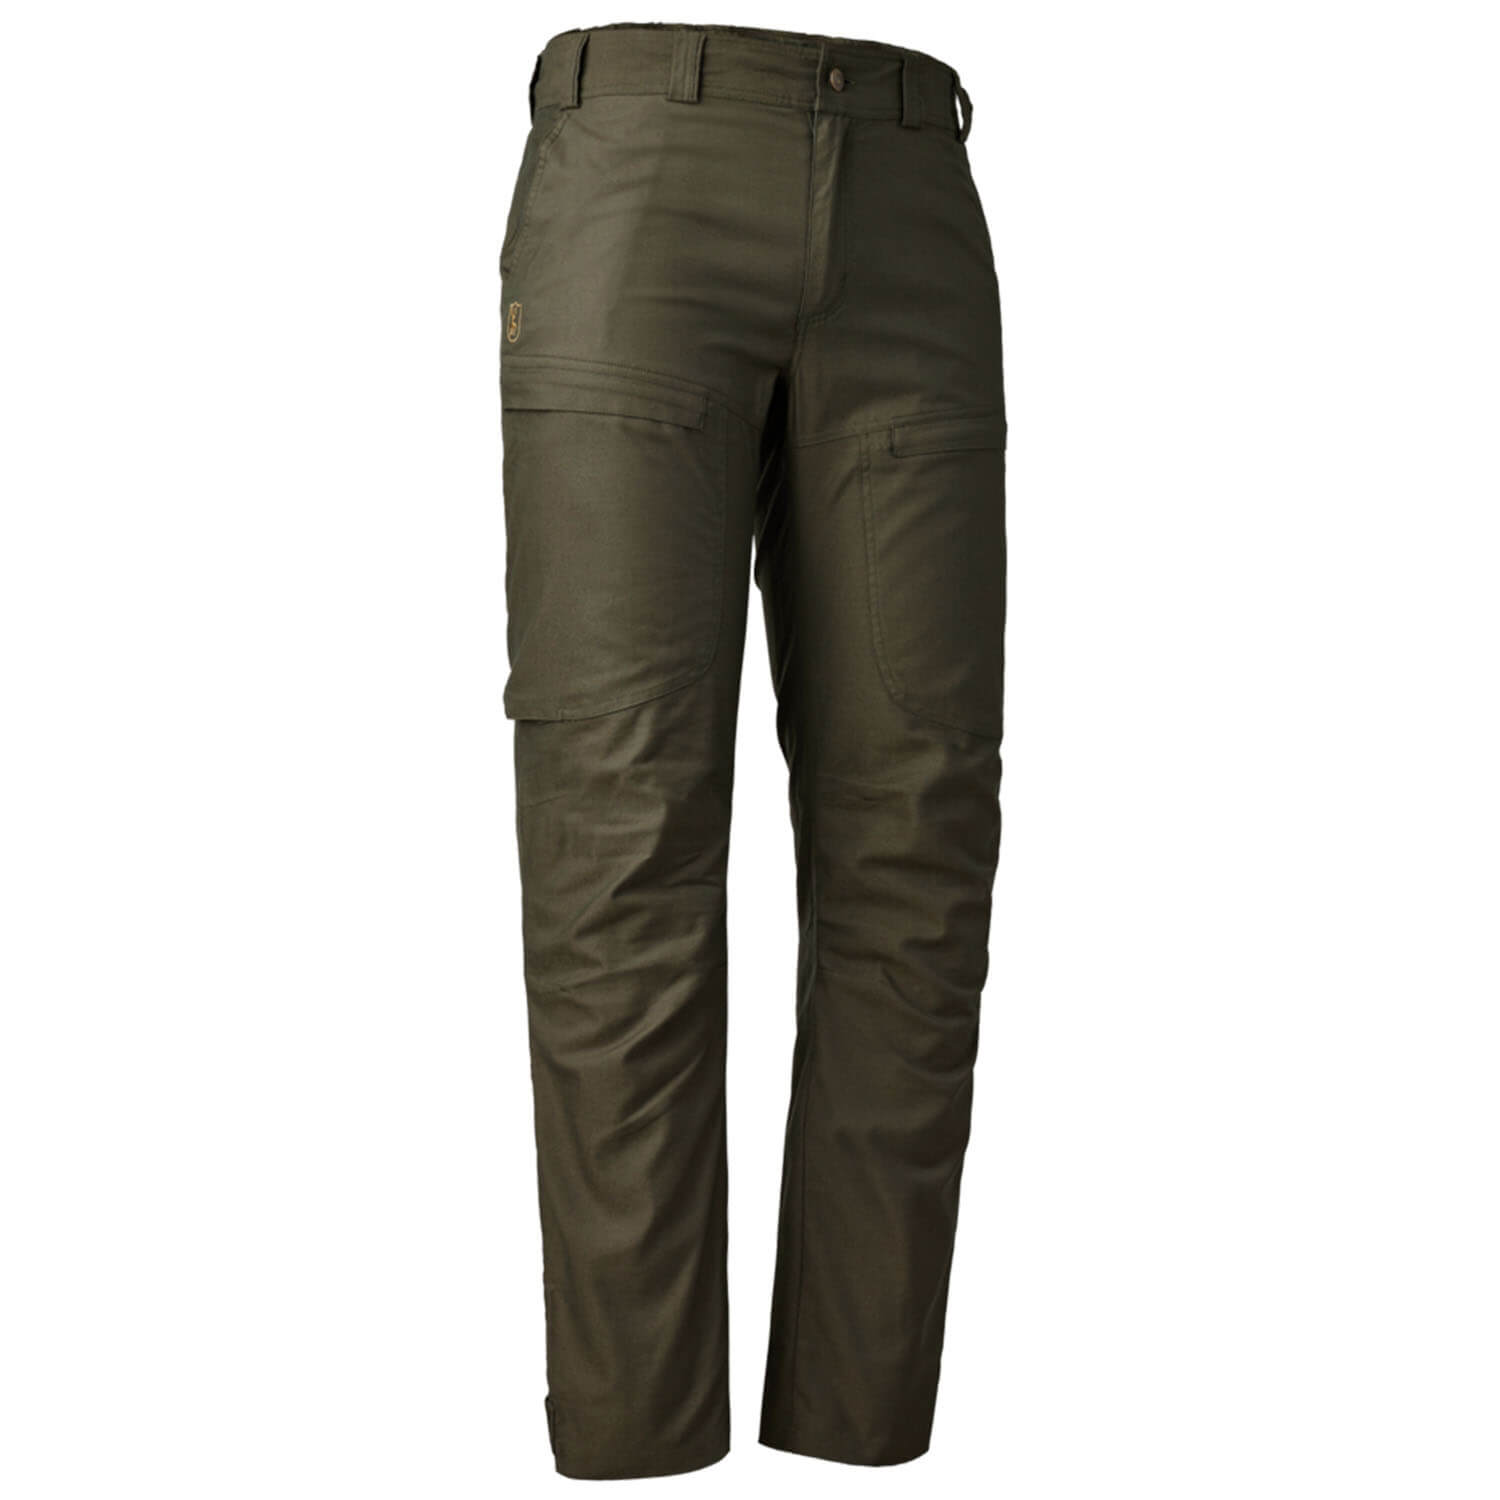 Deerhunter Trousers Matobo (Forest Green) - Hunting Trousers